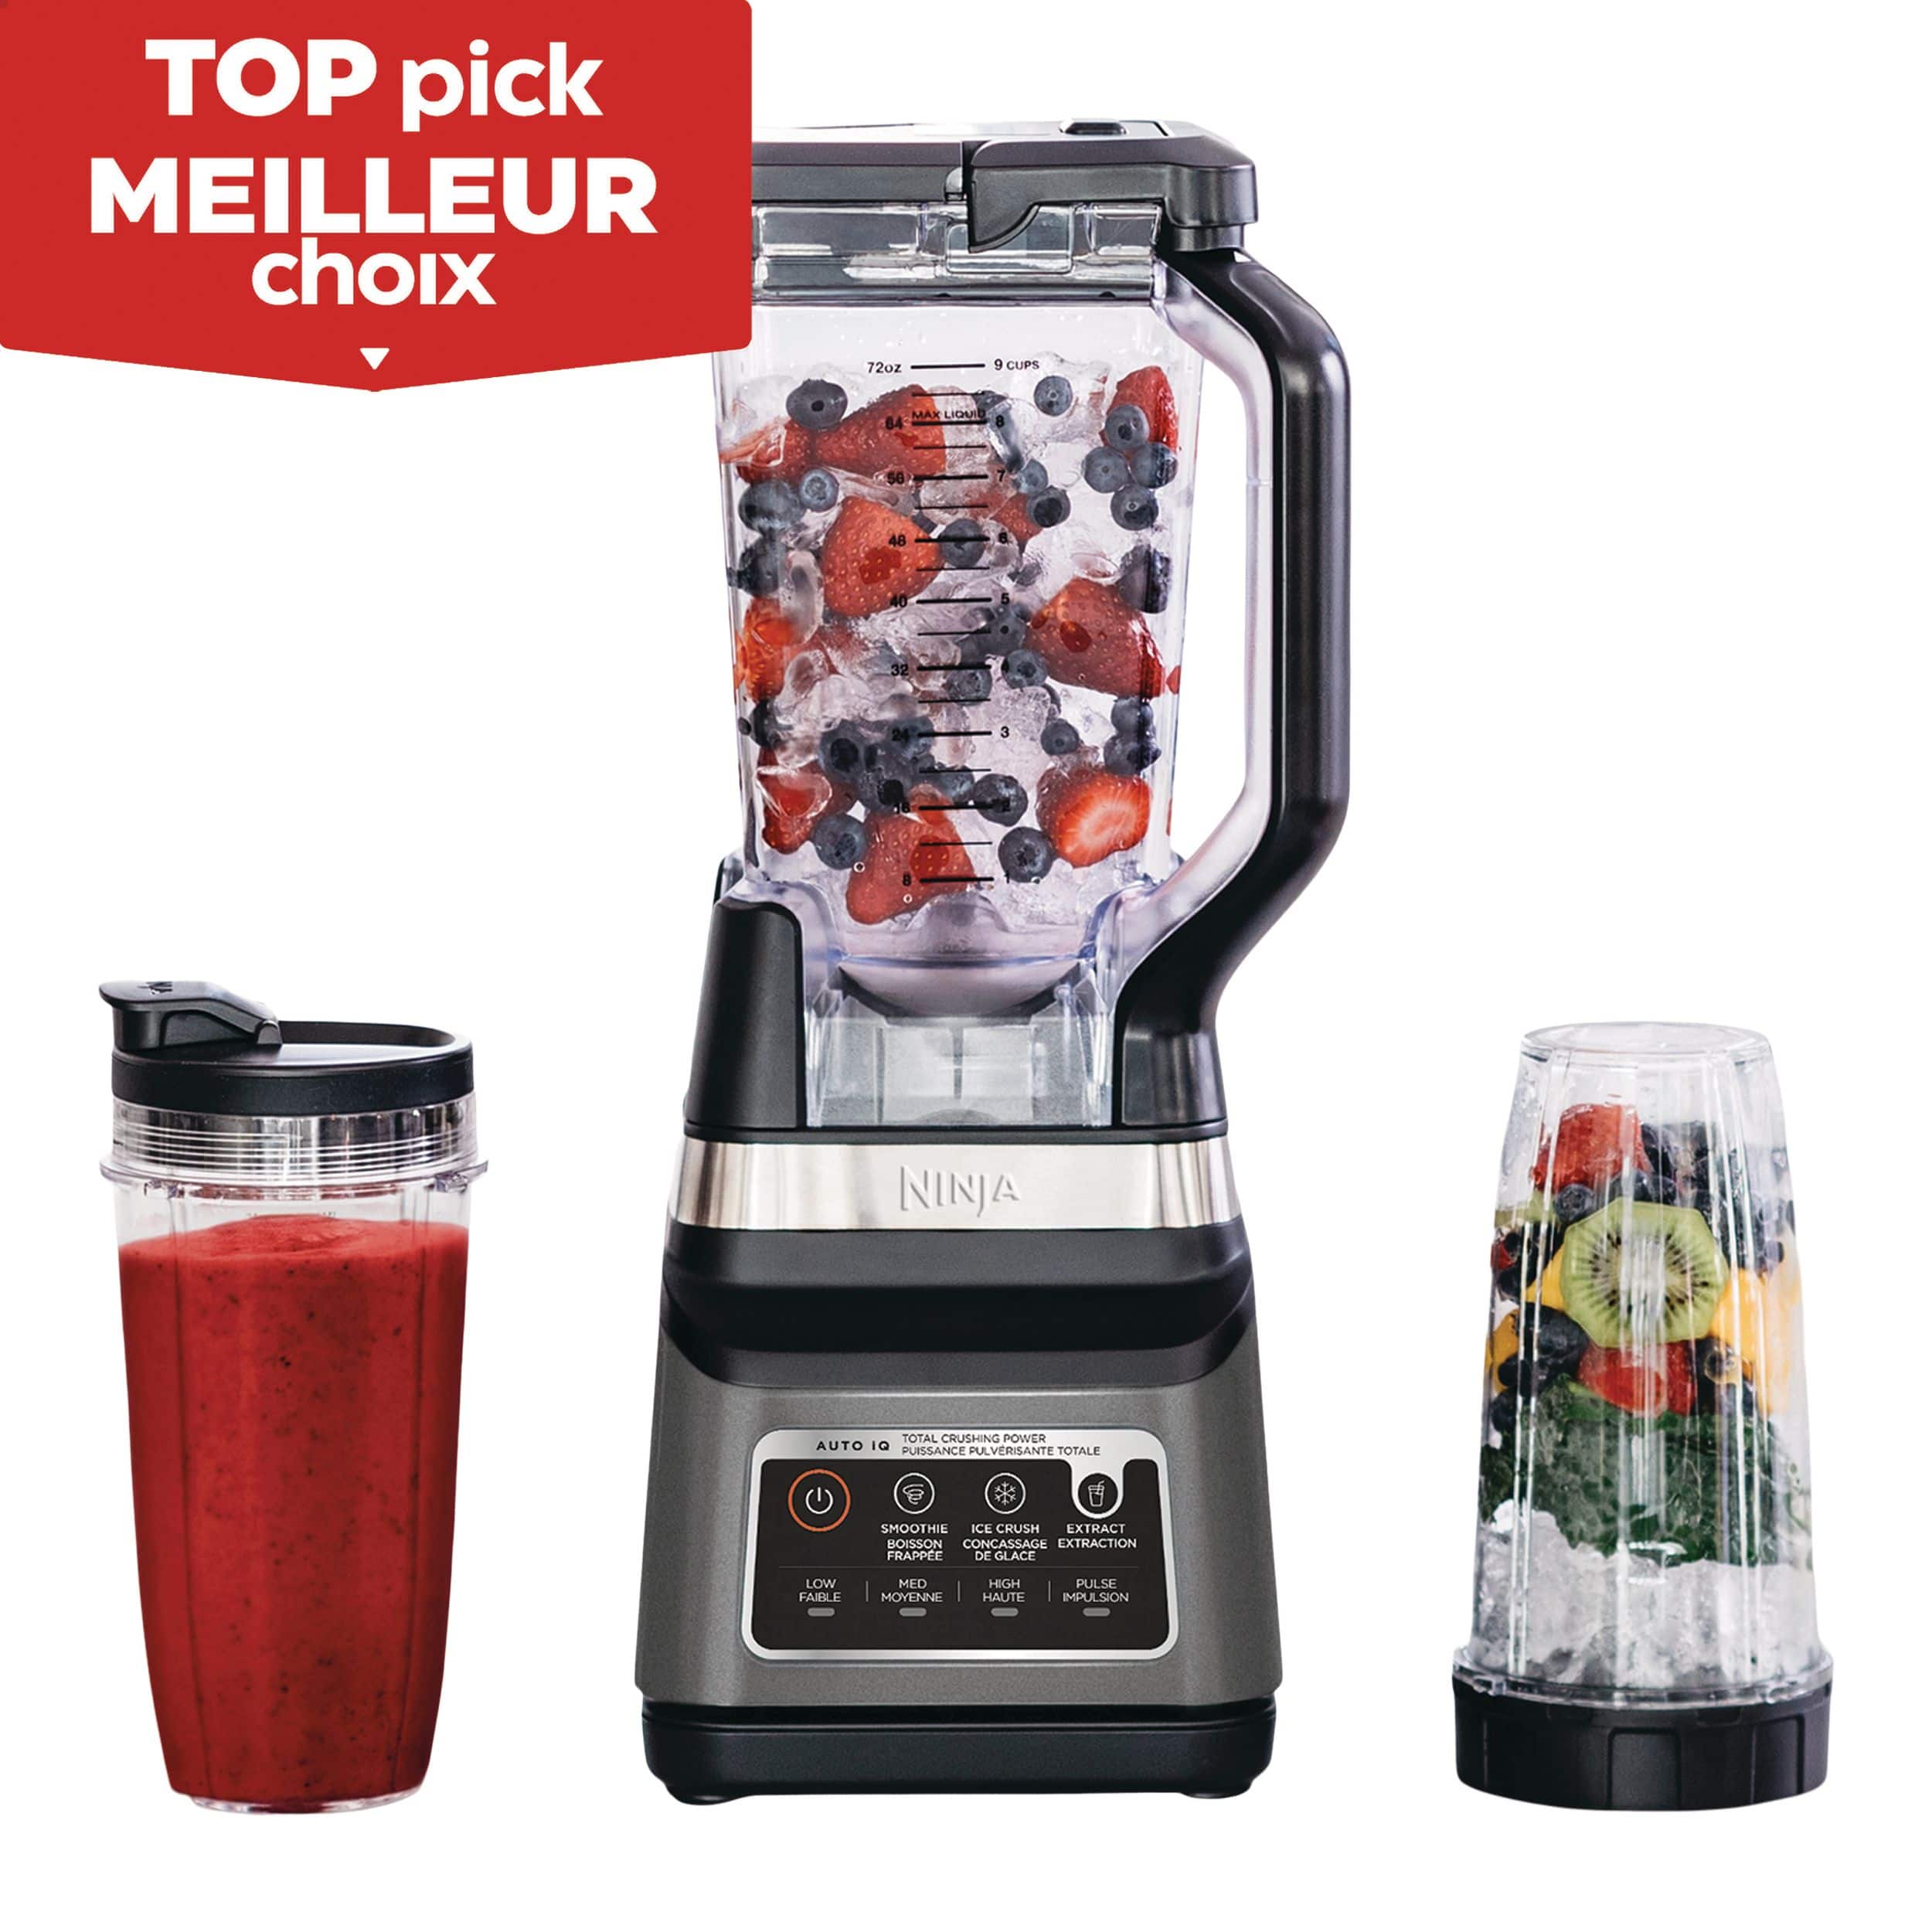 https://media-www.canadiantire.ca/product/living/kitchen/kitchen-appliances/0430730/ninja-professional-plus-blender-duo-with-auto-iq-63235528-ad99-494a-9d3e-f816601579be-jpgrendition.jpg